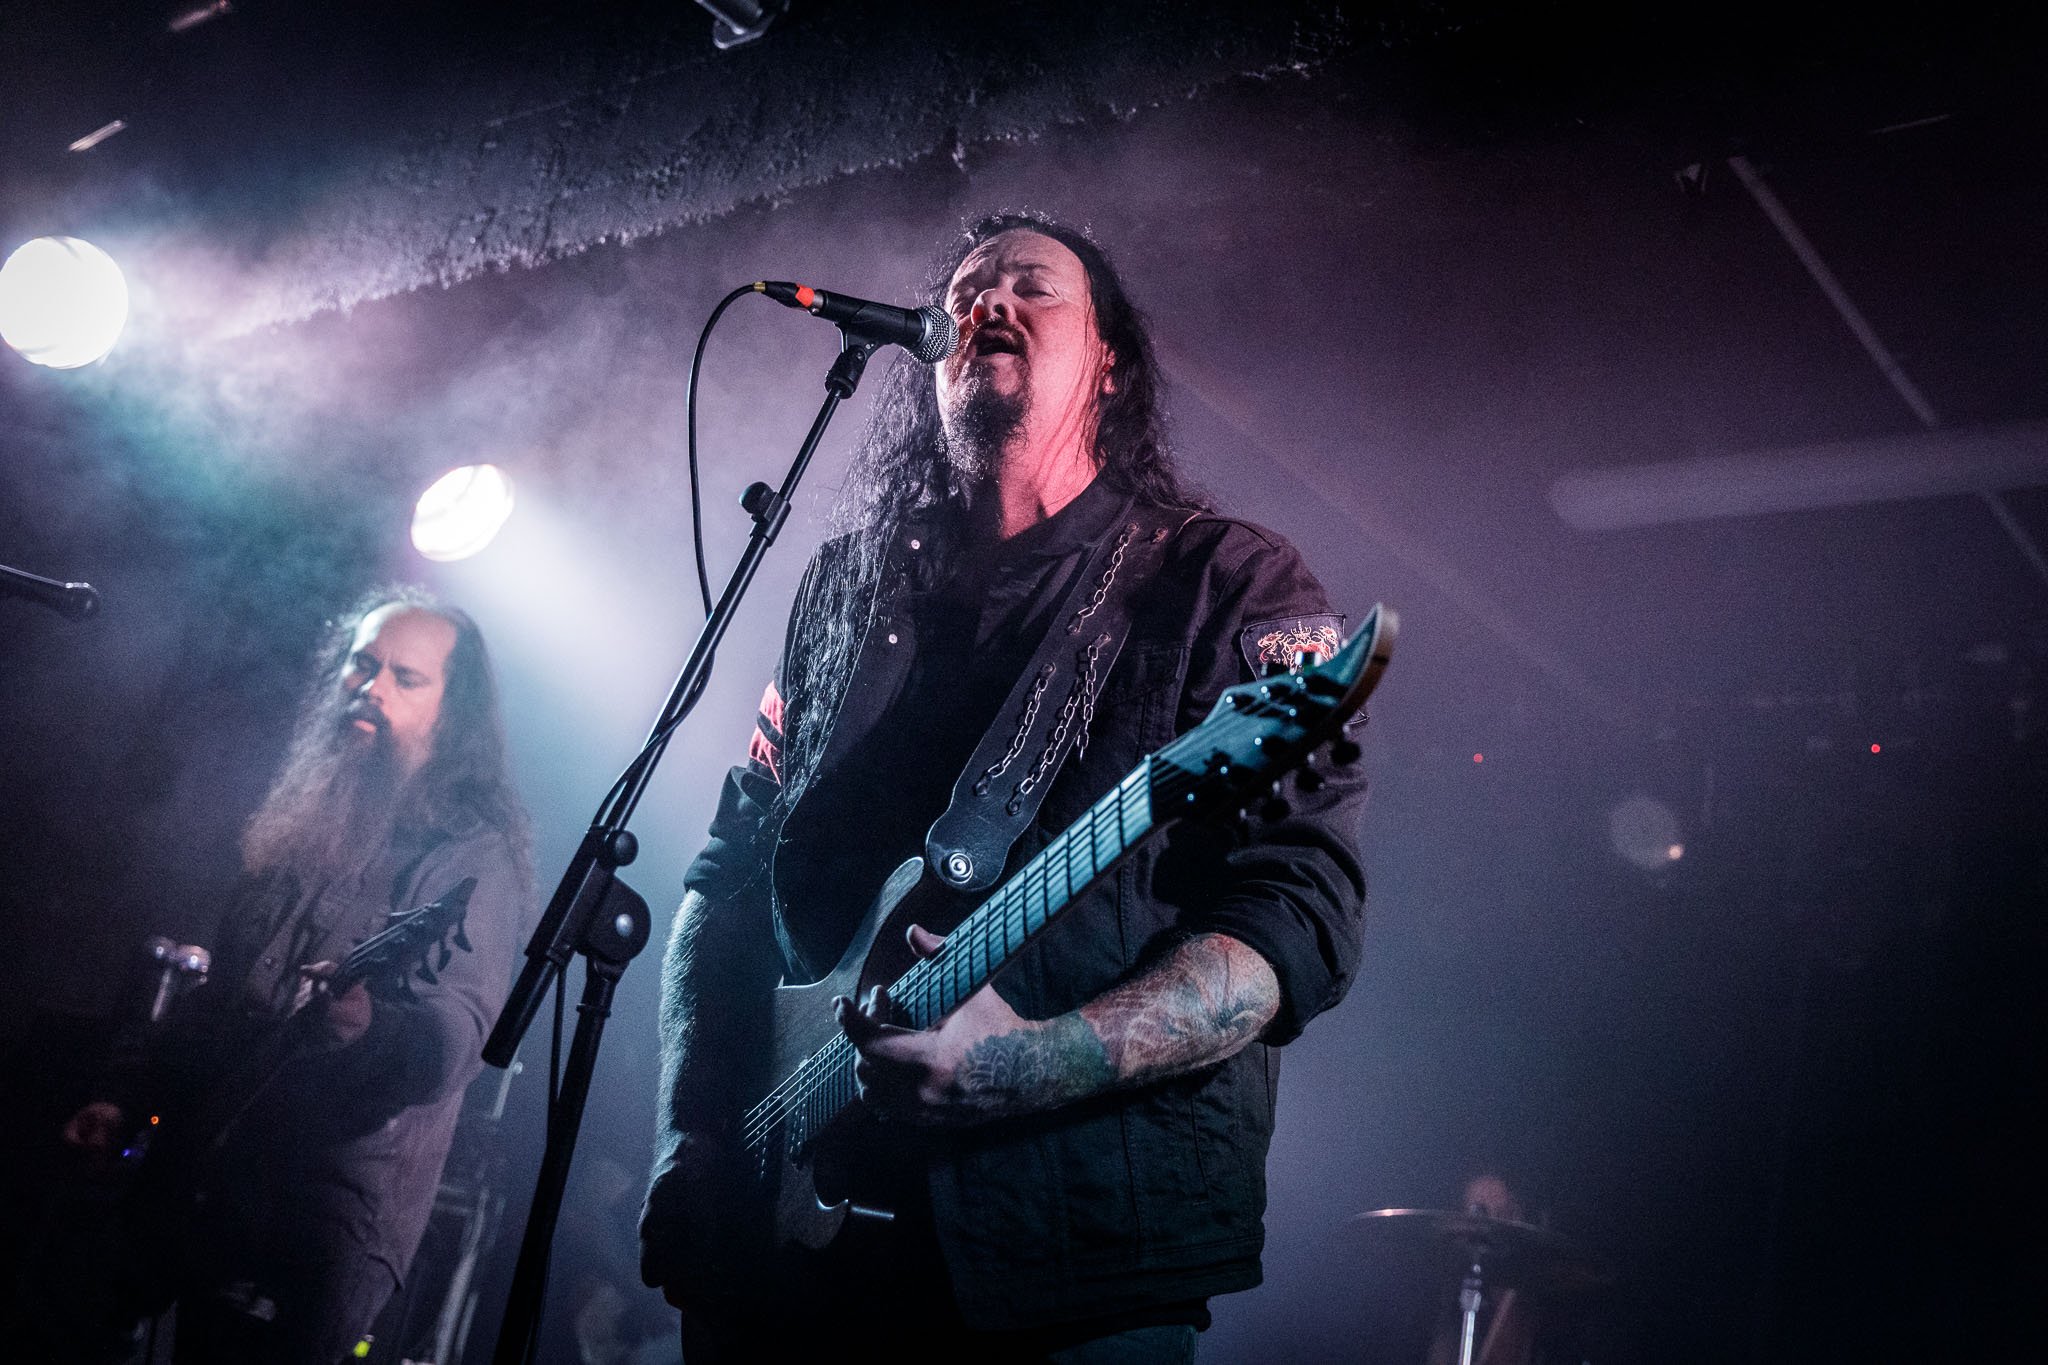 Evergrey at Academy 3 in Manchester on September 20th 2022 ©Joh